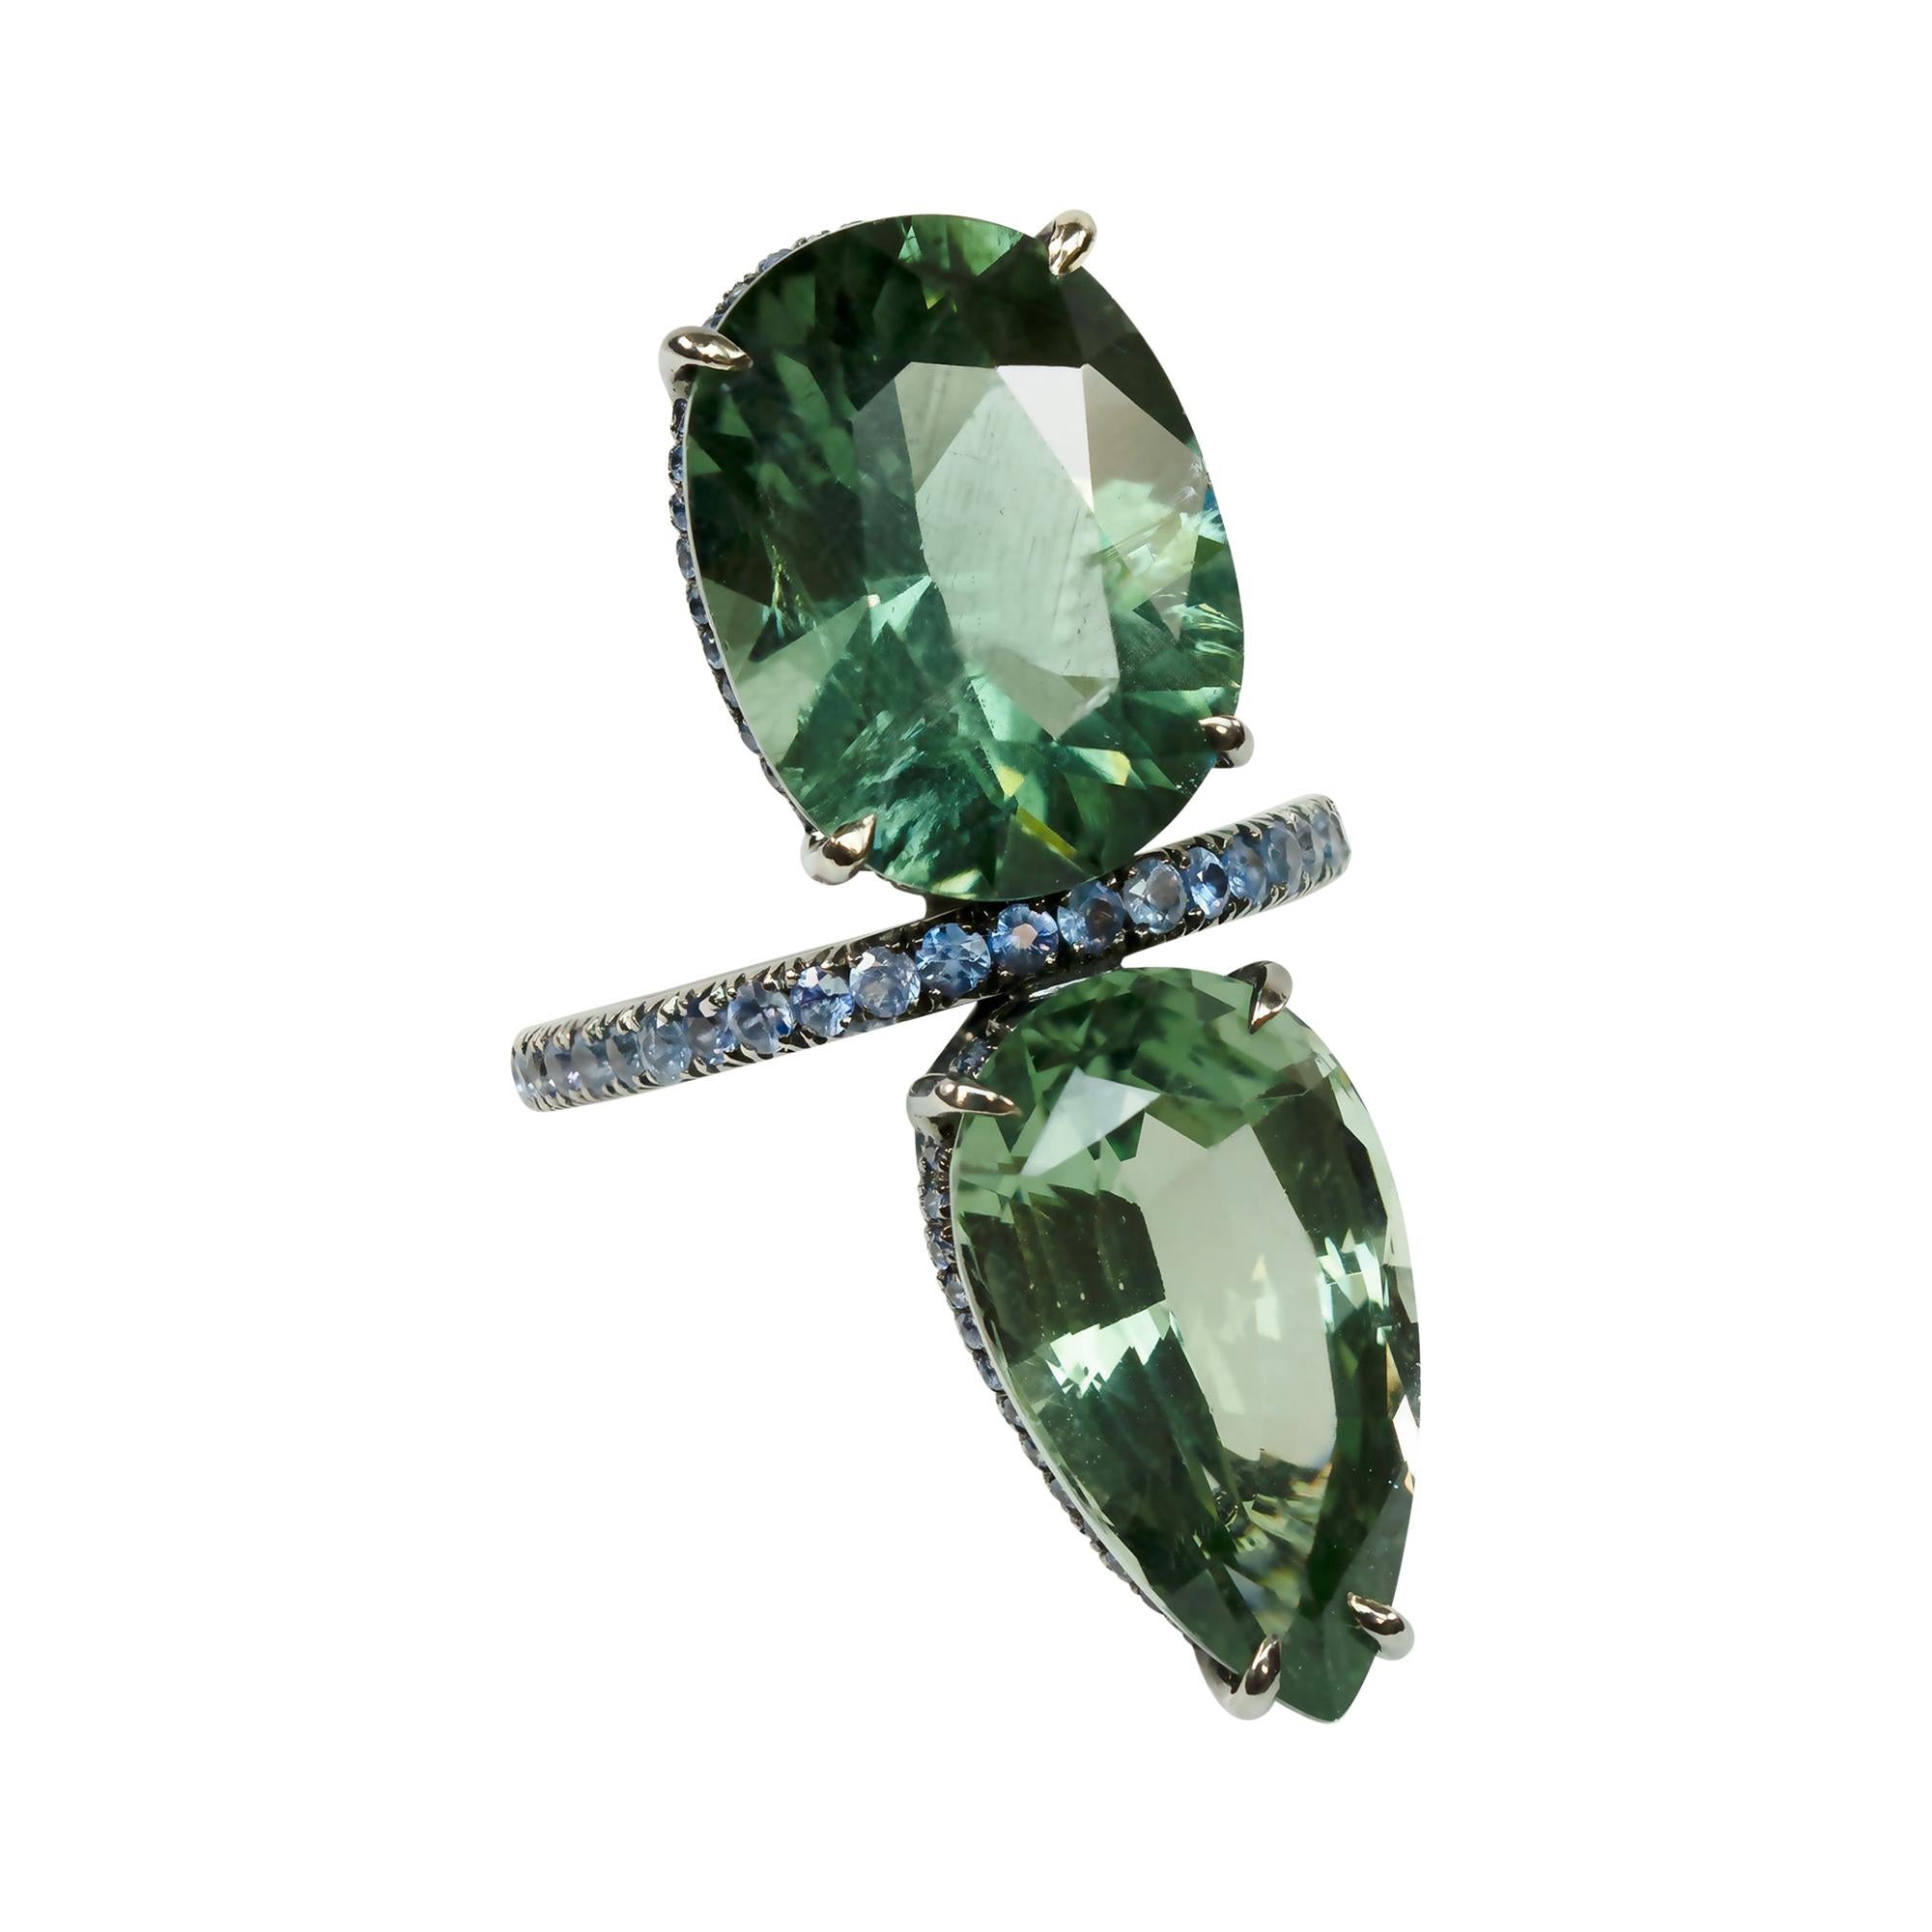 18.15 Carat Green Apatite 1.29 Carat Blue Sapphire Cocktail Ring For Sale